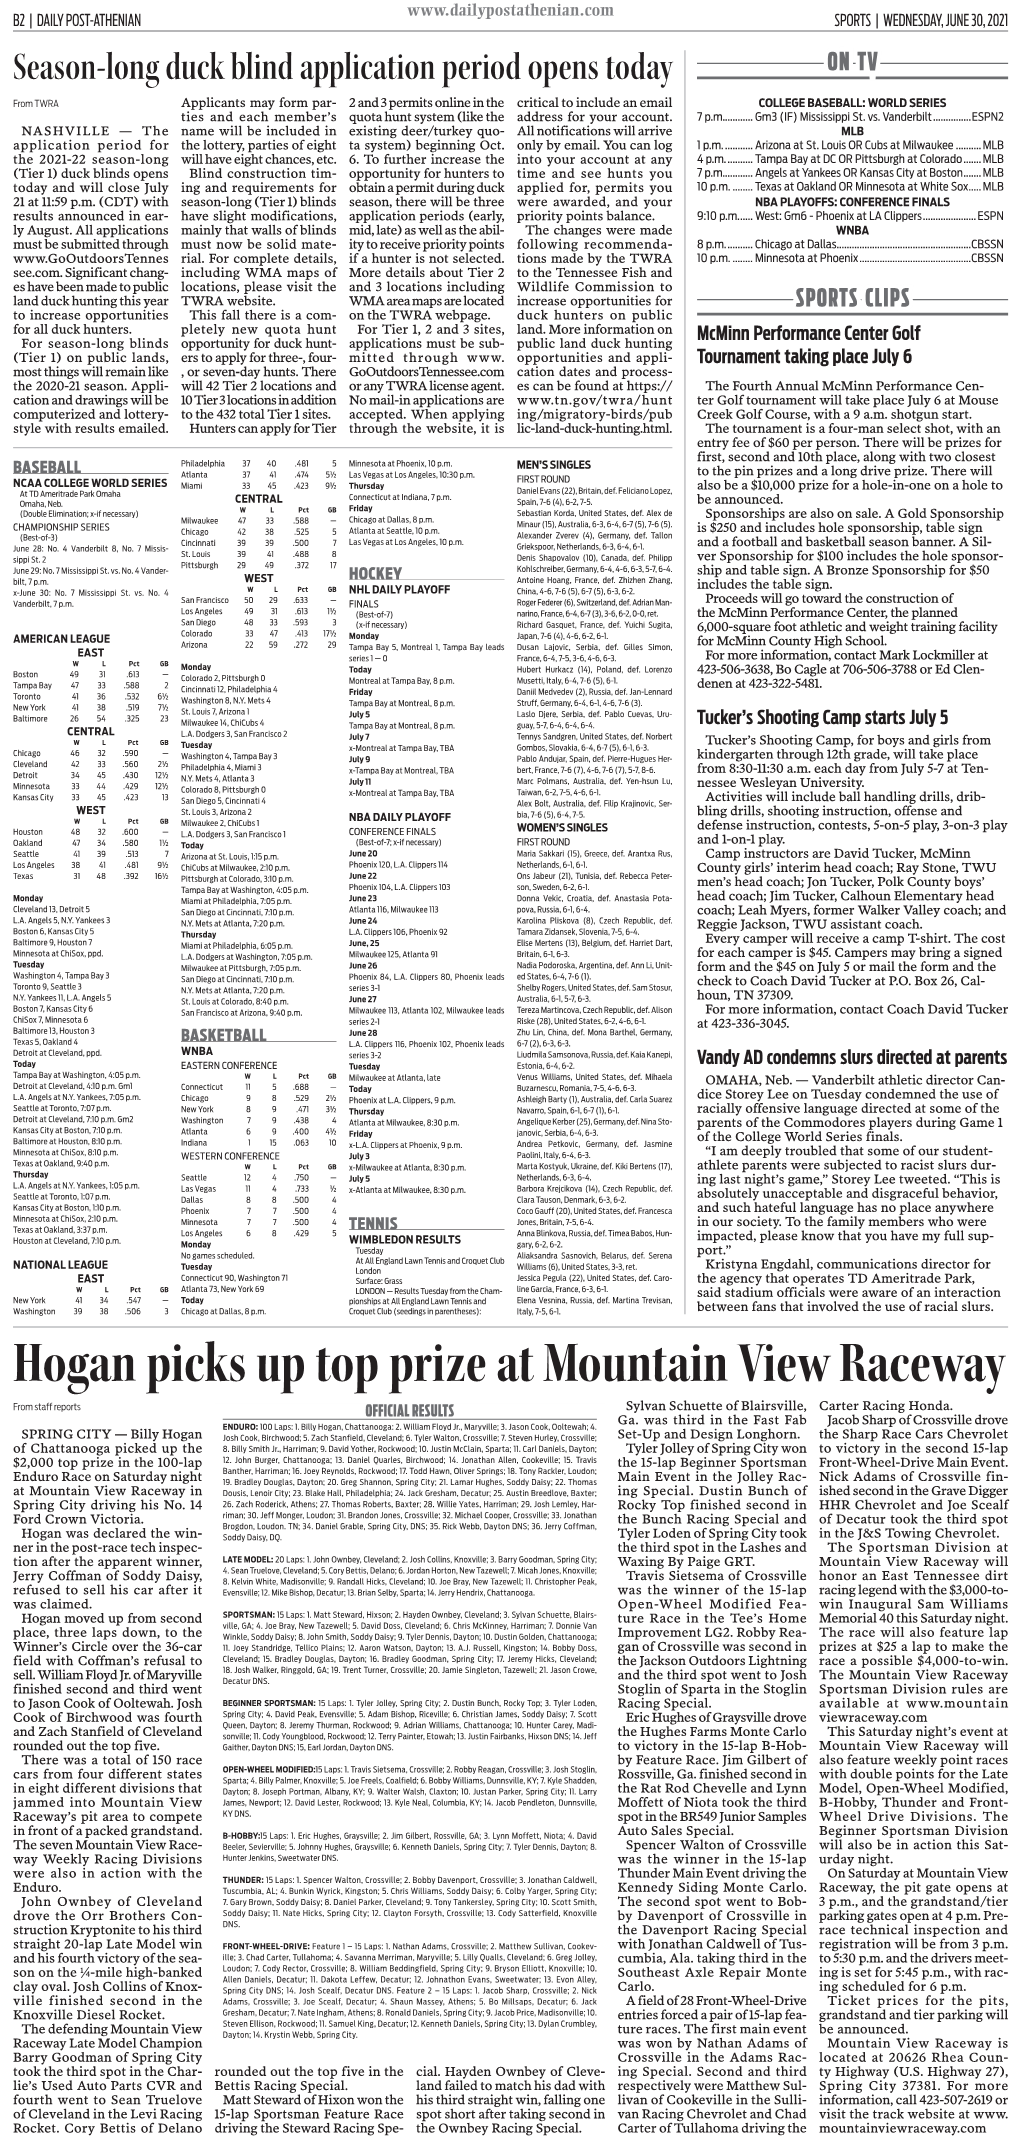 Hogan Picks up Top Prize at Mountain View Raceway from Staff Reports OFFICIAL RESULTS Sylvan Schuette of Blairsville, Carter Racing Honda